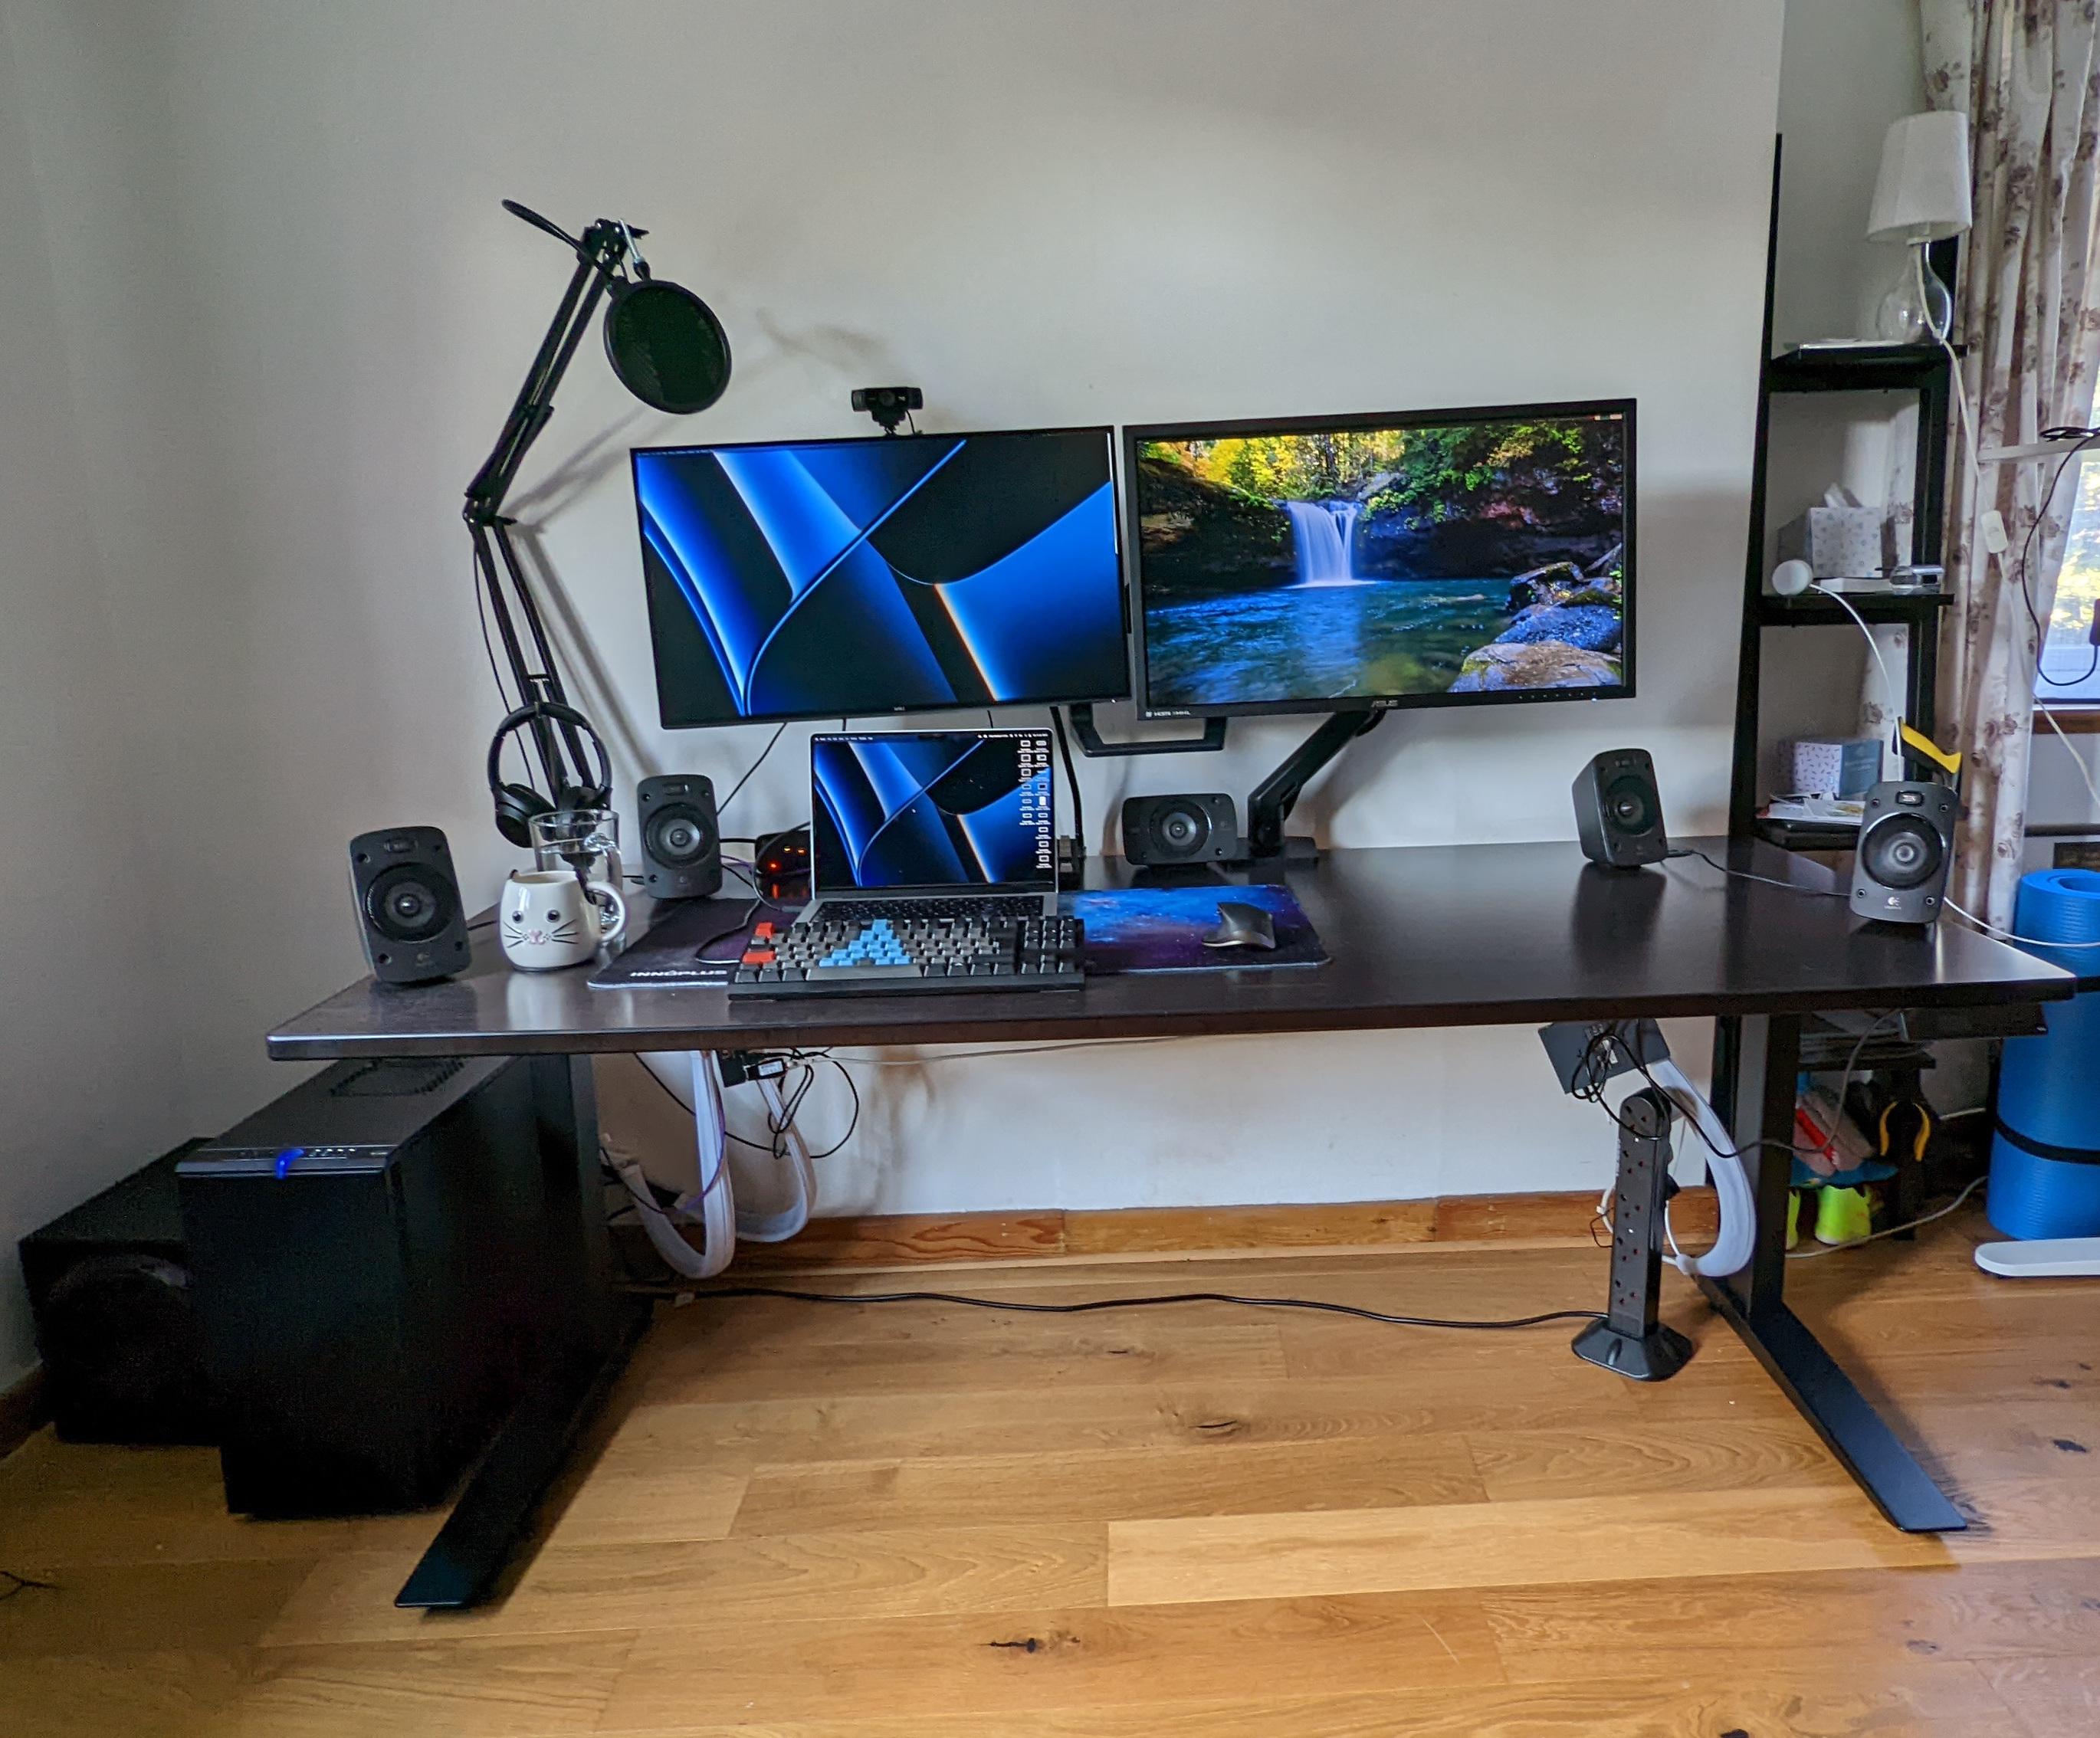 A photo of a Jamie's desk setup in "work" mode. The desk is a Fully Jarvis sit-stand desk, with a dark bamboo top and black legs. Around the desk position is a set of surround sound speakers. There is a microphone arm in the left hand side corner of the desk, and a headphones stand in front of it. On the desk, there is a nebula themed large mouse-and-keyboard pad, on top of which is a WASD Keyboard v2 keyboard (in dark grey, black, red and light blue colours, where the blue keys are in the shape of the Arch Linux logo), a Logtech MX Master mouse, and a Deliveroo-issued M1 Macbook Pro. There are two screens, using an Ergotron dual monitor mount. The left hand side screen is a Dell UltraSharp (4k) 27" USB-C Hub Monitor - U2722DE, and the right hand side screen is an Asus PB287Q 28" 4K Monitor. Above the left hand side monitor is a Logitech C922 webcam. On the left hand side screen, the background image is the same as the Macbook, indicating that it is connected to the laptop, and on the right, the image is a waterfall into a natural enclosed pool. Below the desk you can see an Ethernet switch on the right which unfortunately isn't yet cable tidied, as well as a USB hub that's also visible and not-yet-tidied, on the left. There is also a little bit of mess and some shelves on the right hand side of the image that couldn't be cropped out easily.